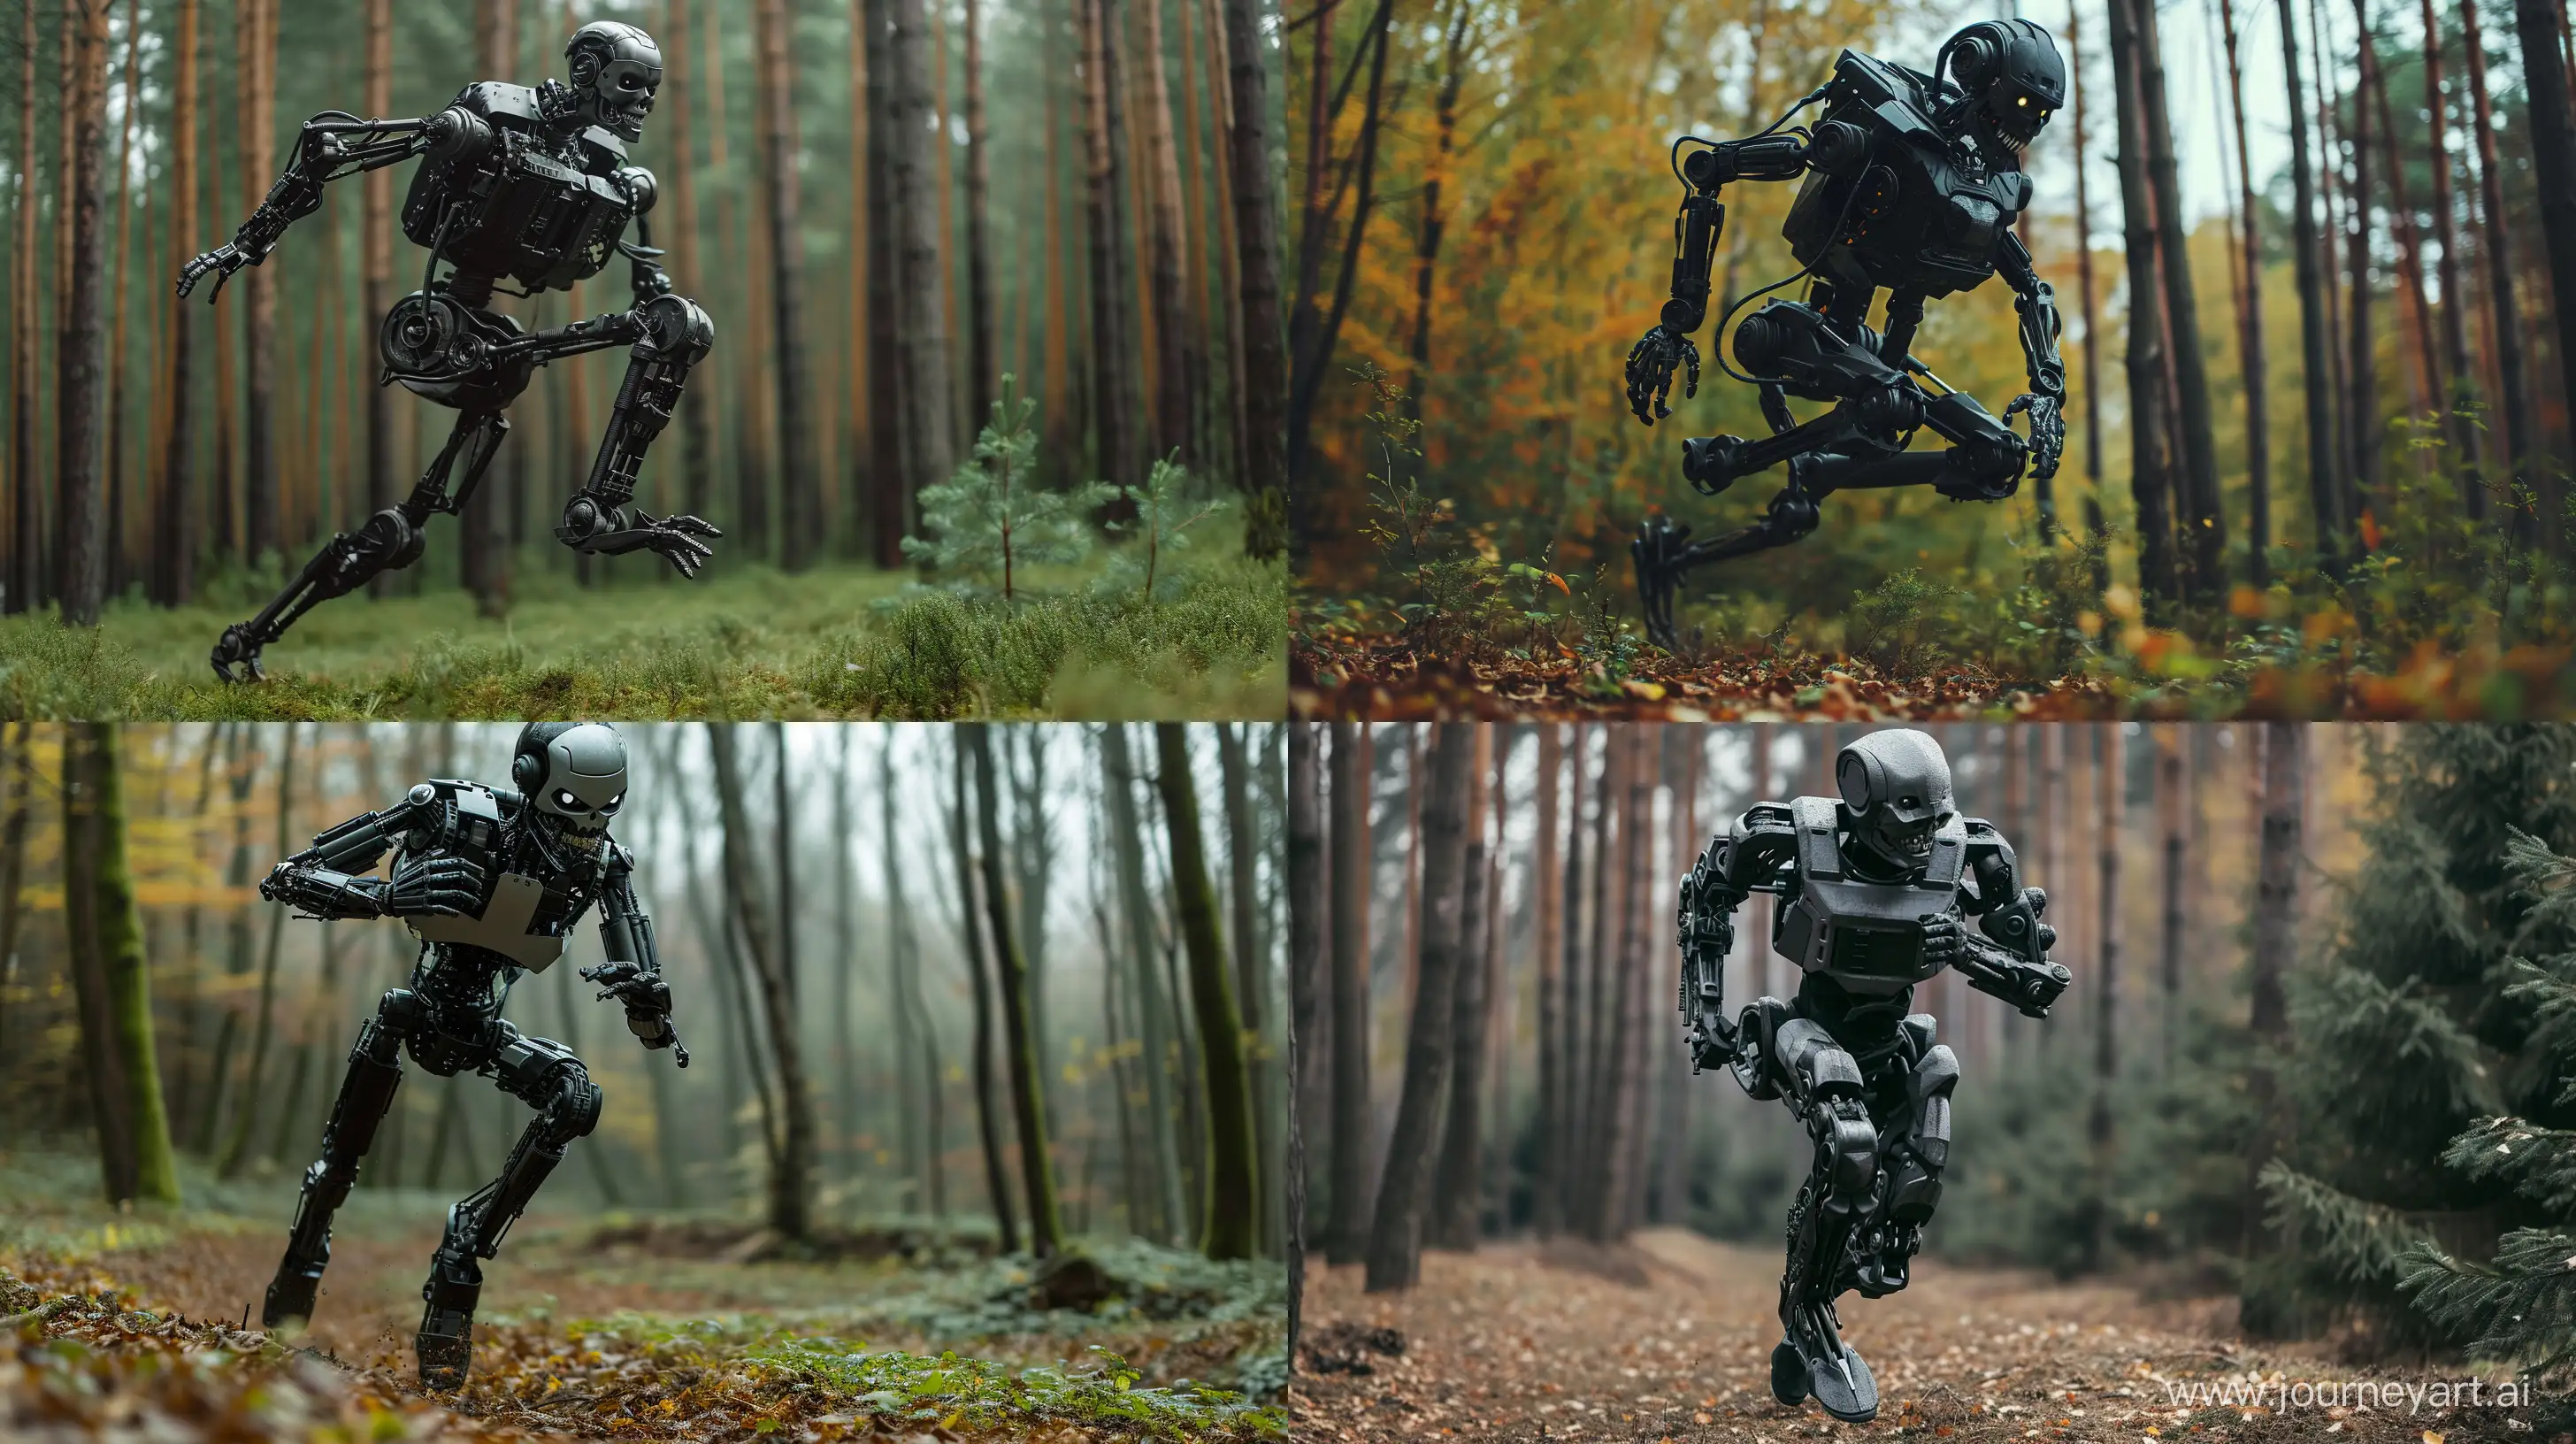 Eerie-Robot-Sprinting-Through-Enchanted-Forest